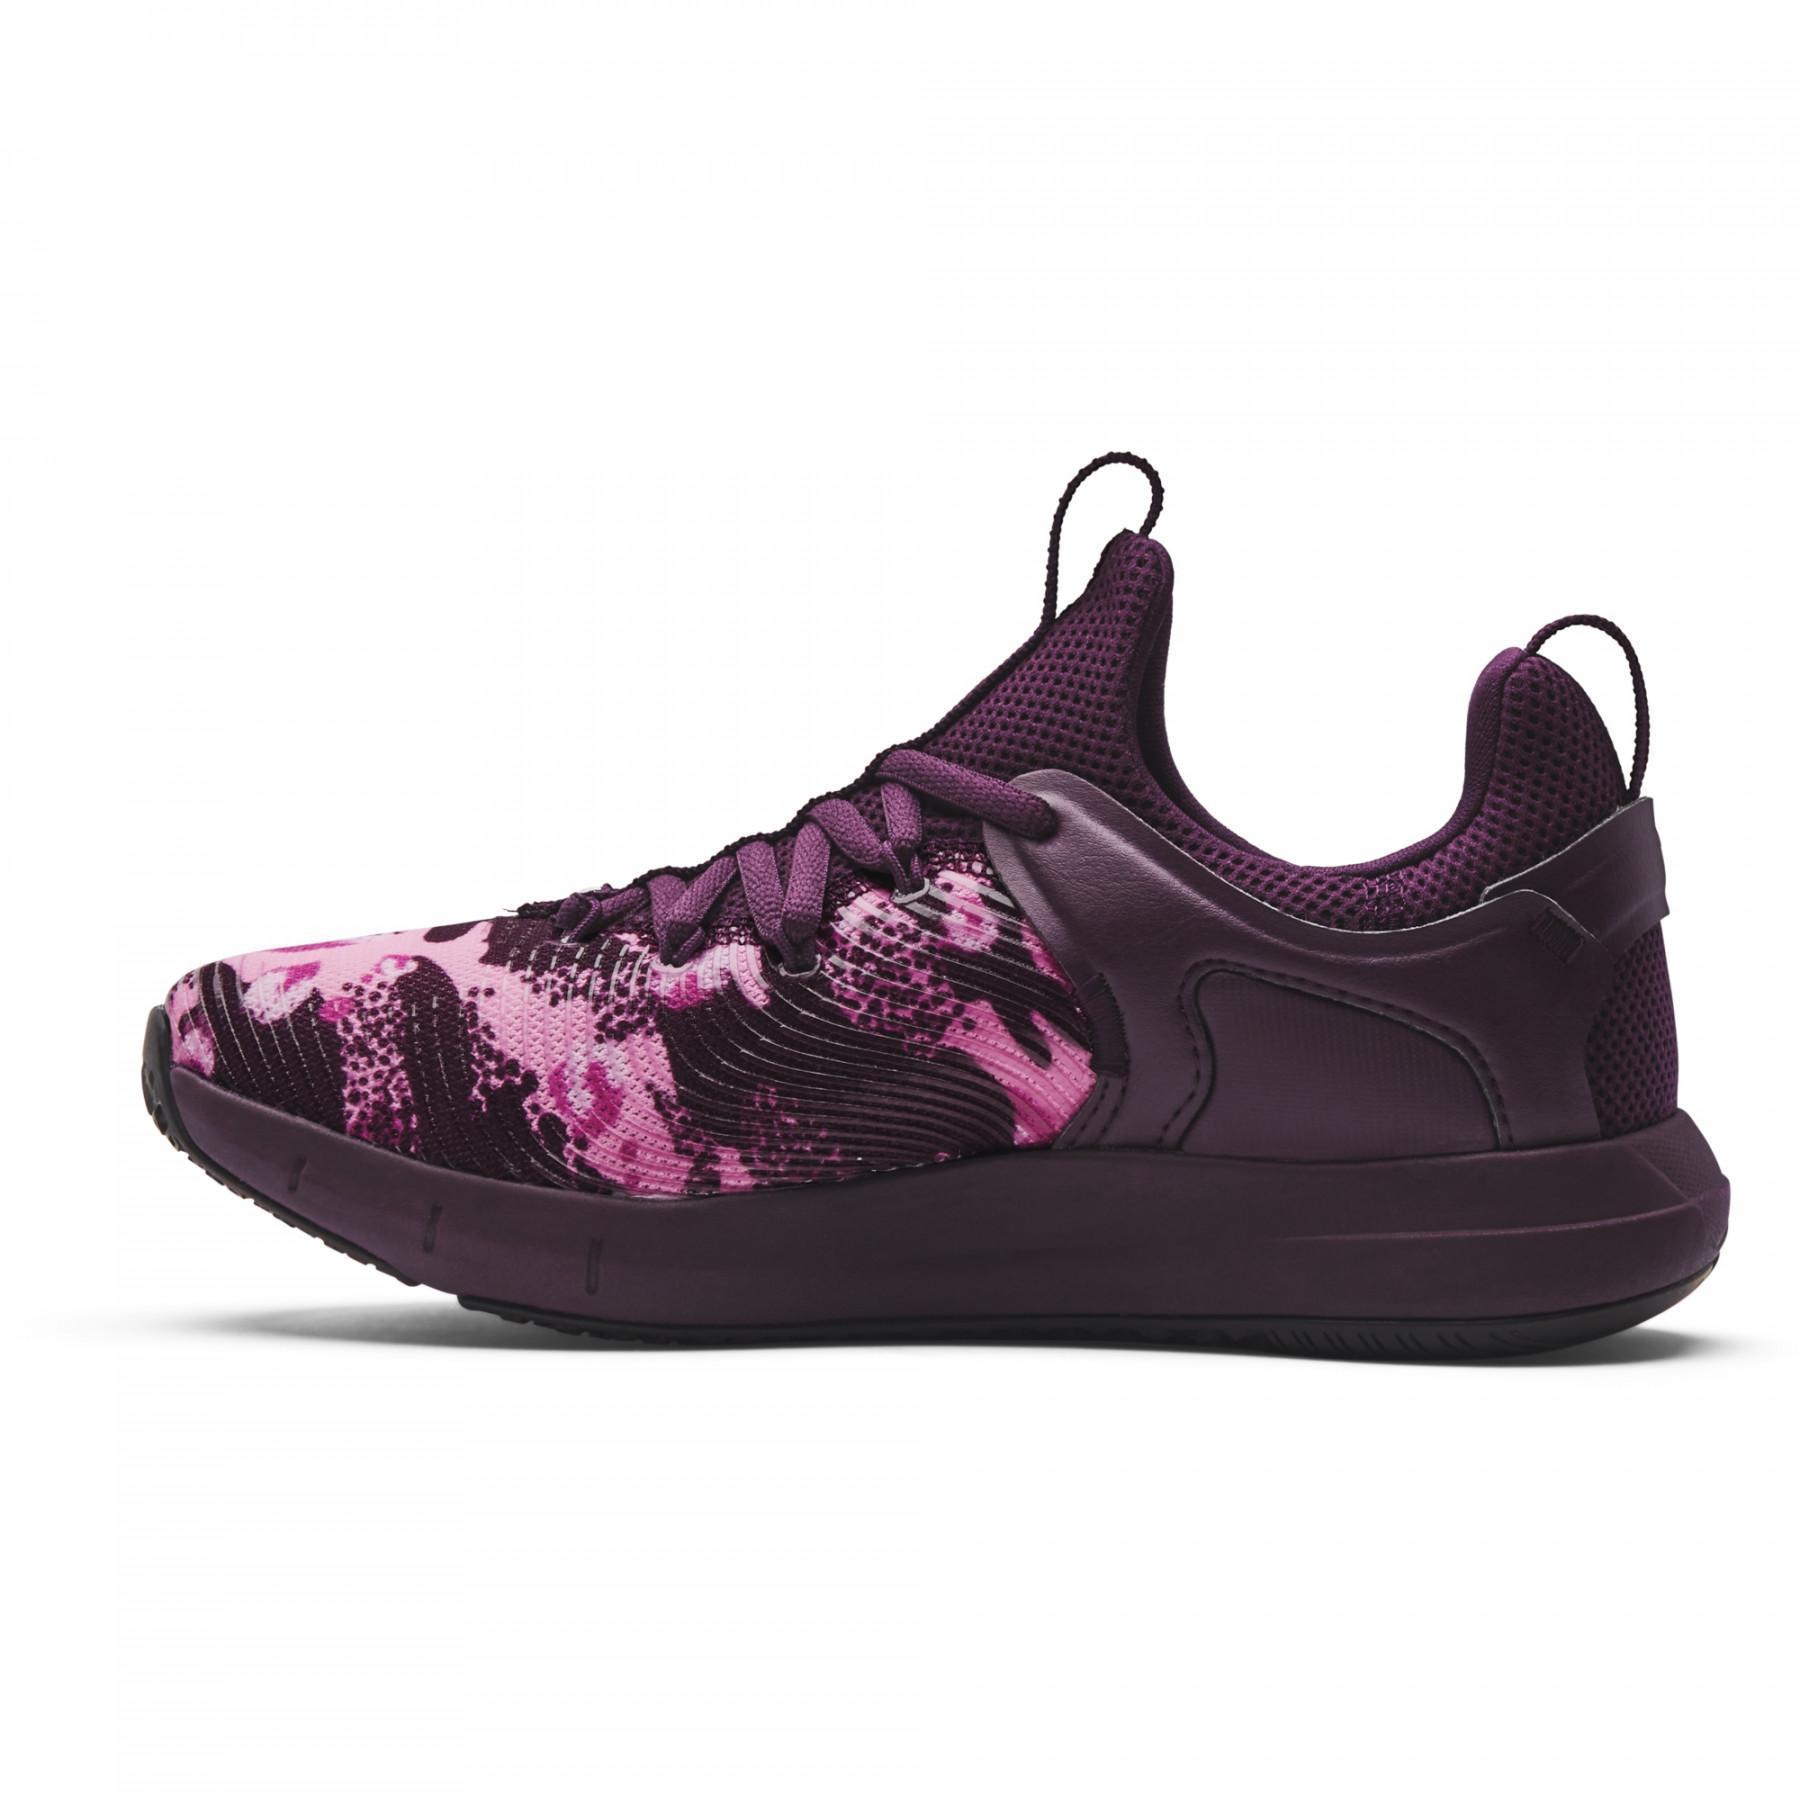 Chaussures femme Under Armour HOVR Rise 2 PRNT